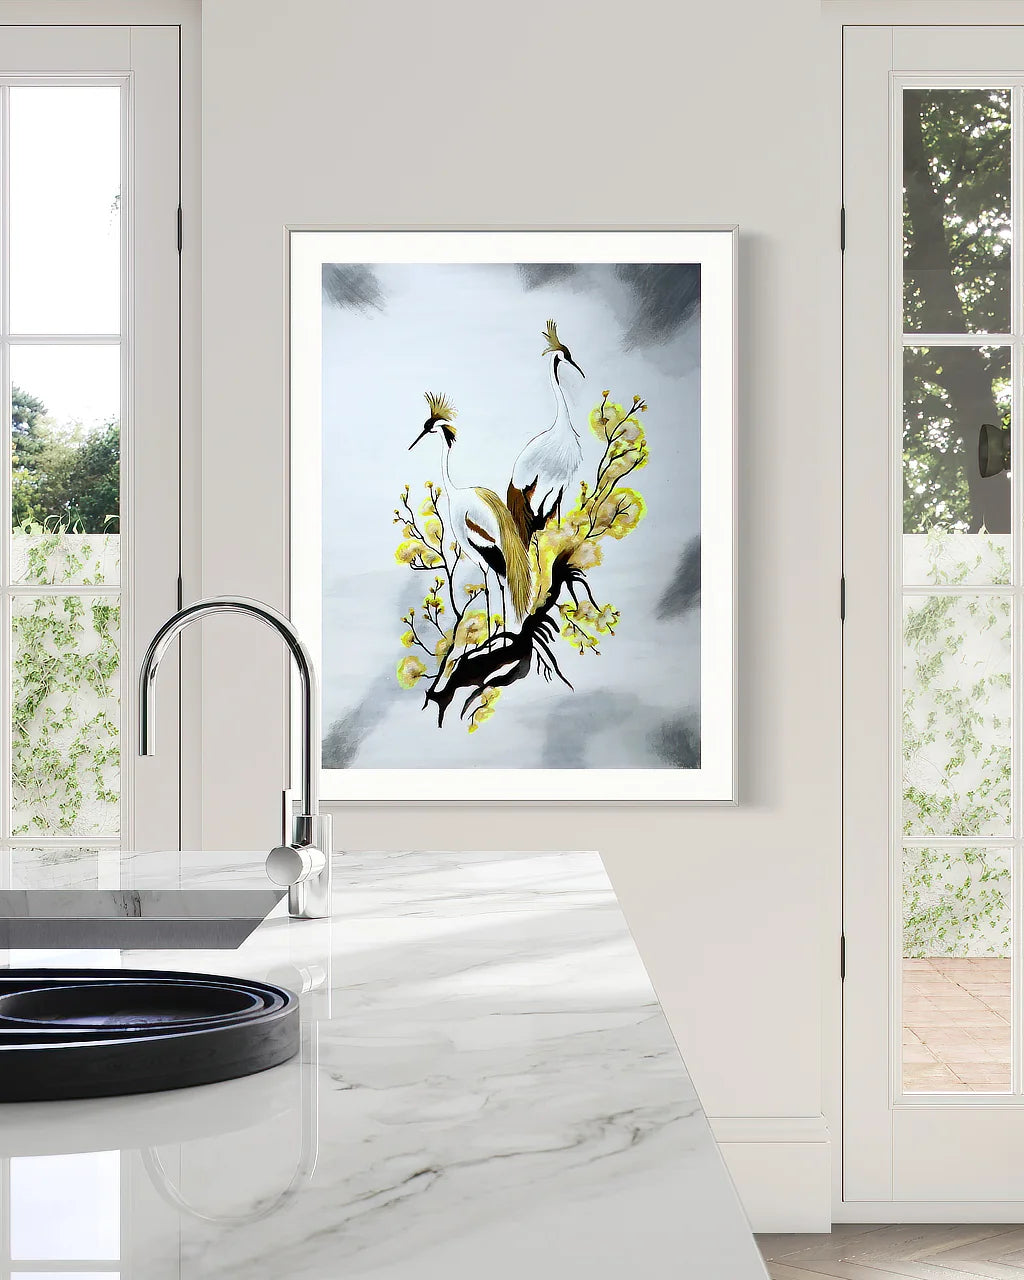 Cranes-not talking print by Sonia Malboeuf hanging in kitchen